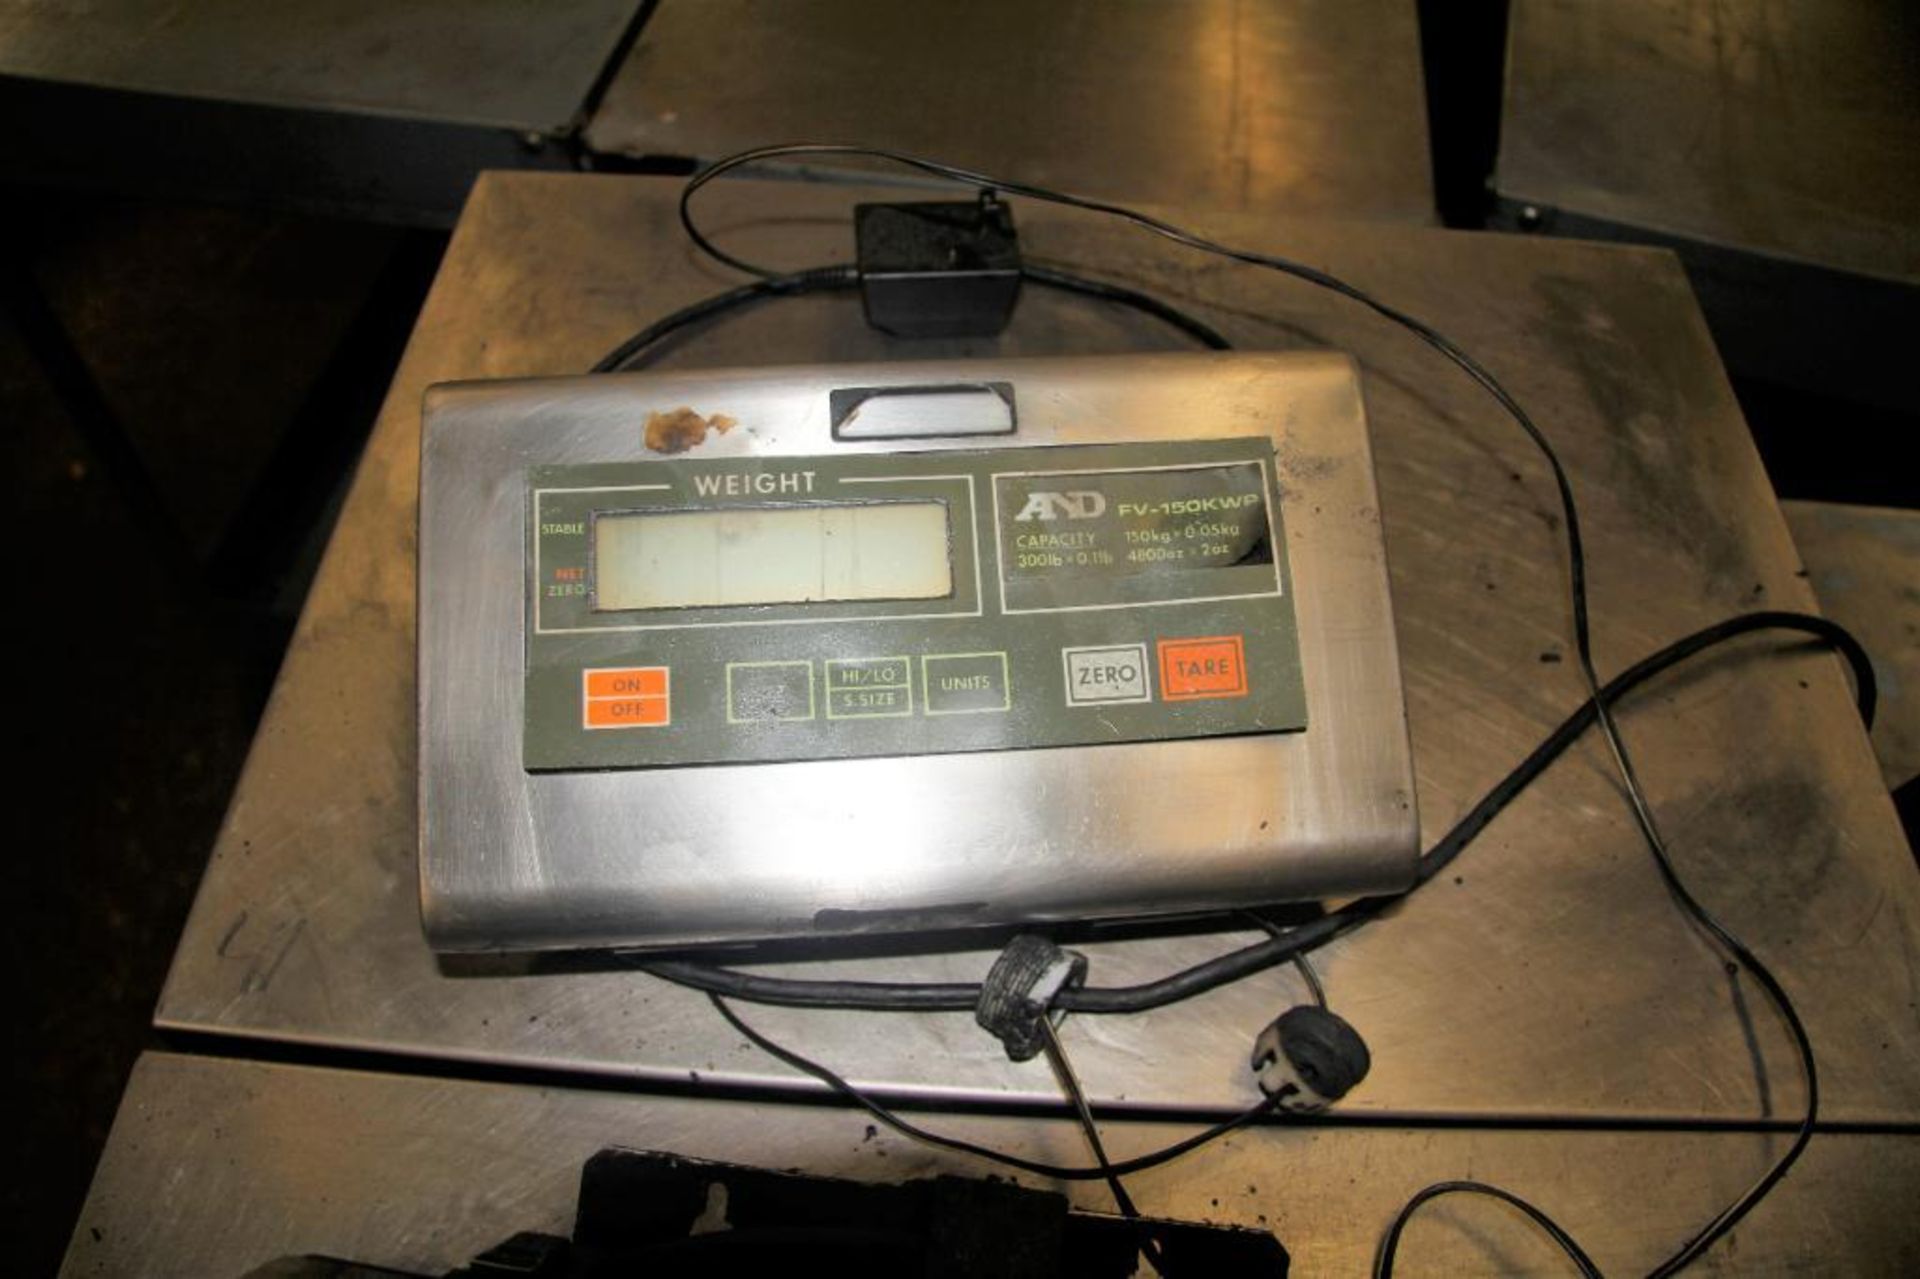 (2) And Fv-150kwp, Digital Bench Scales, 300# X 0.1lb, 15 1/4" X 20-3/4" - Image 2 of 3